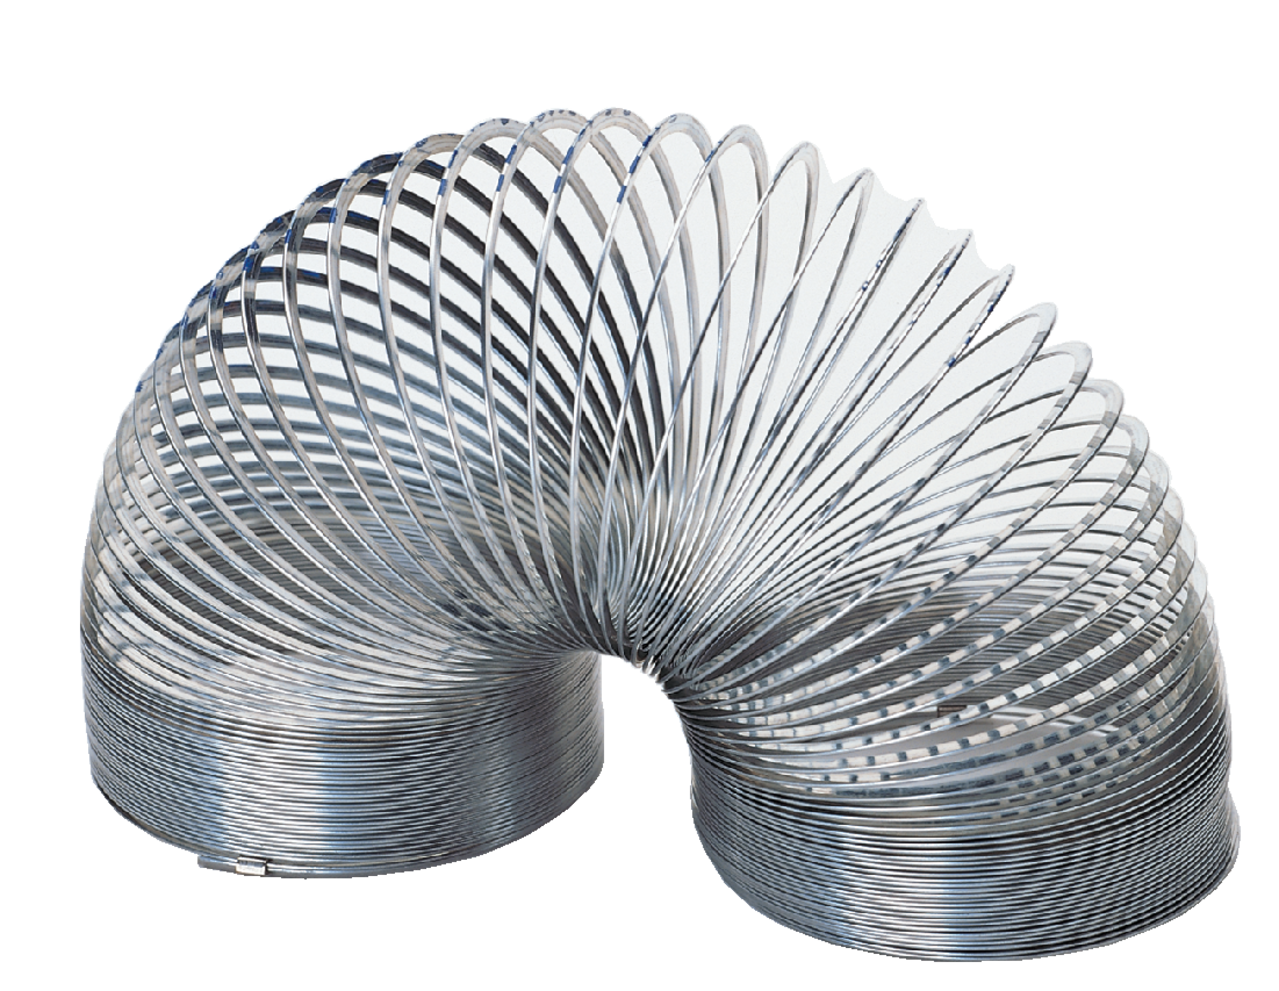 Featured image for “Slinky met dubbele lengte”